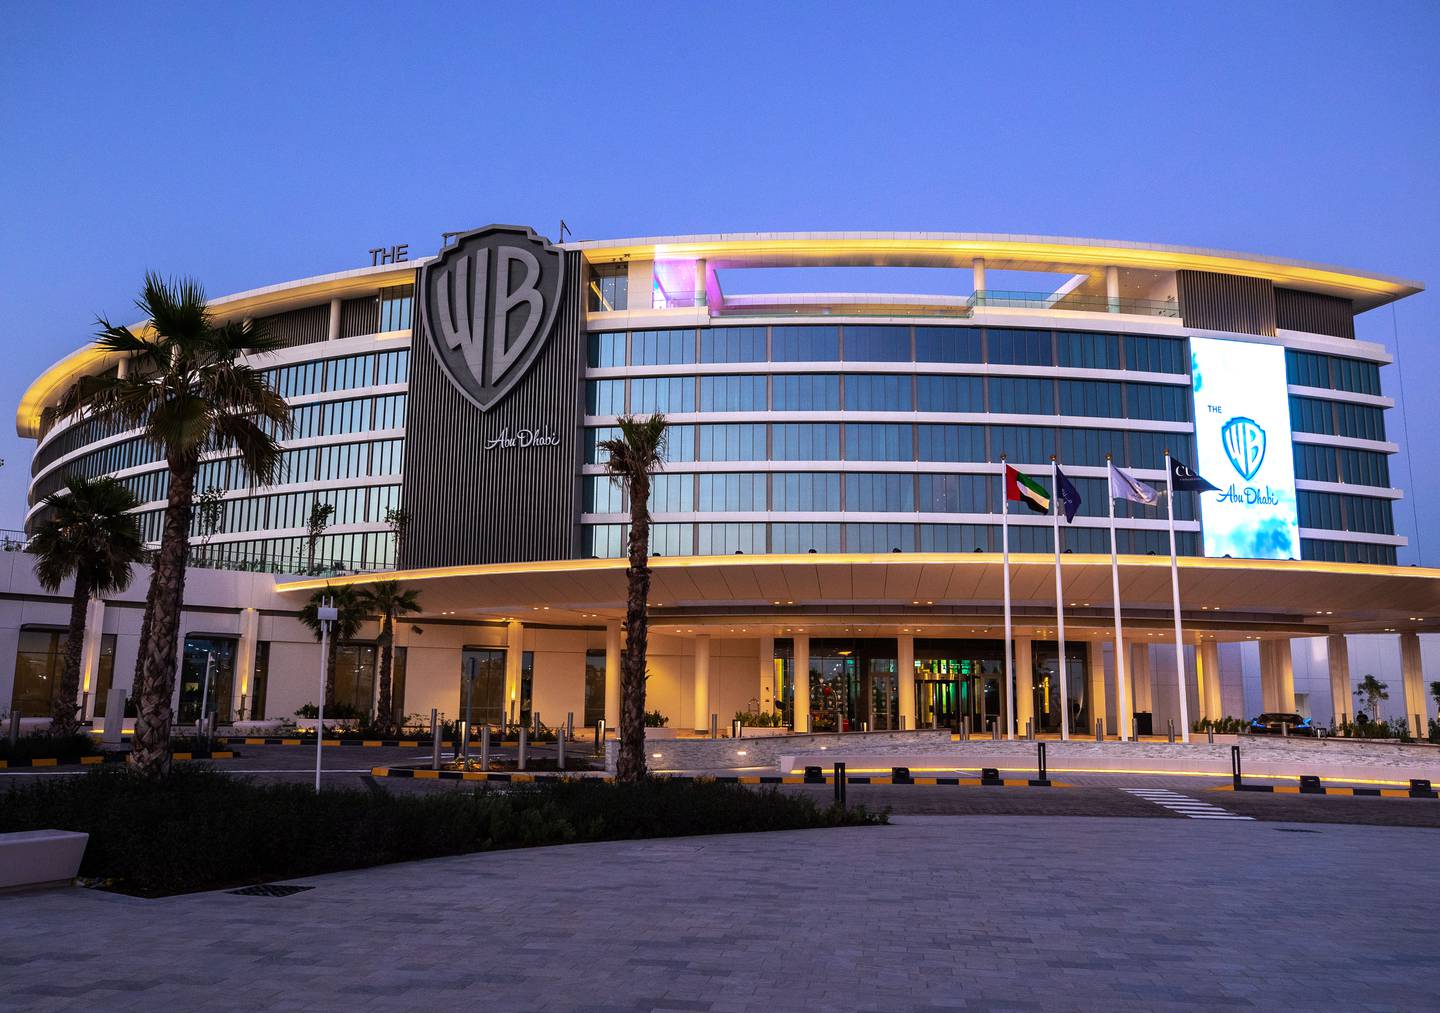 The WB Abu Dhabi is the world’s first Warner Bros hotel. Victor Besa / The National